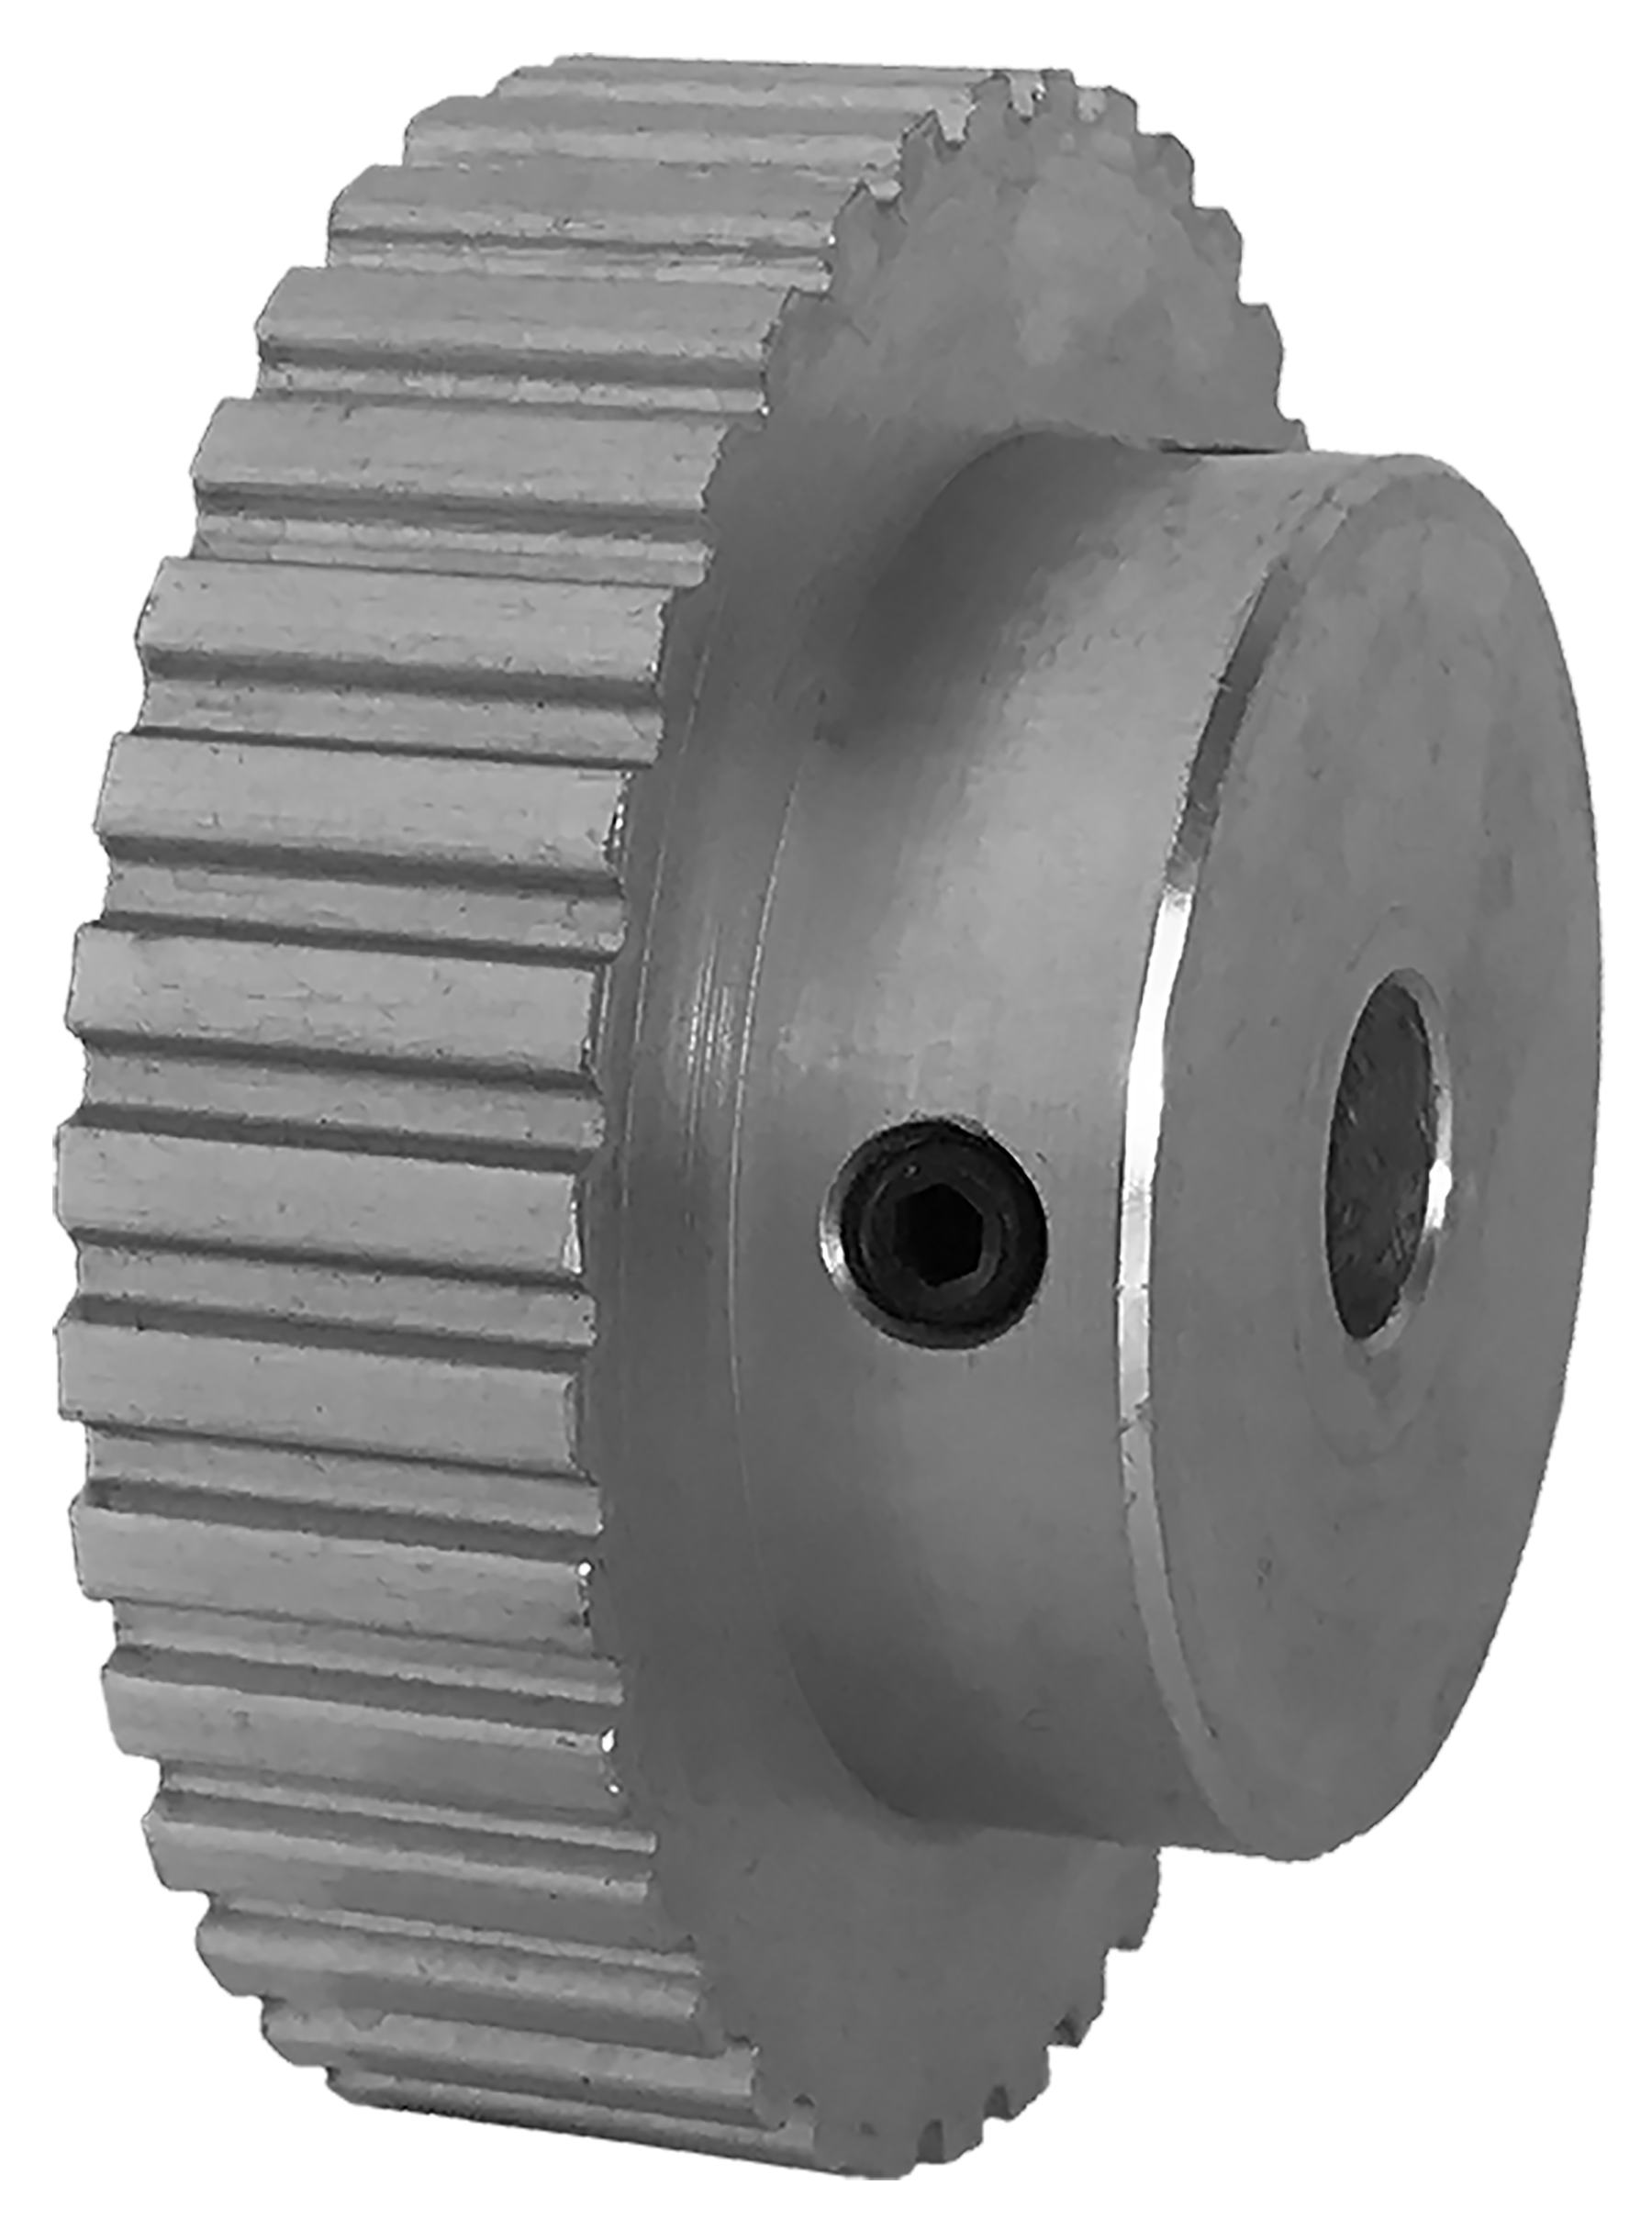 36XL037-6A6 - Aluminum Imperial Pitch Pulleys